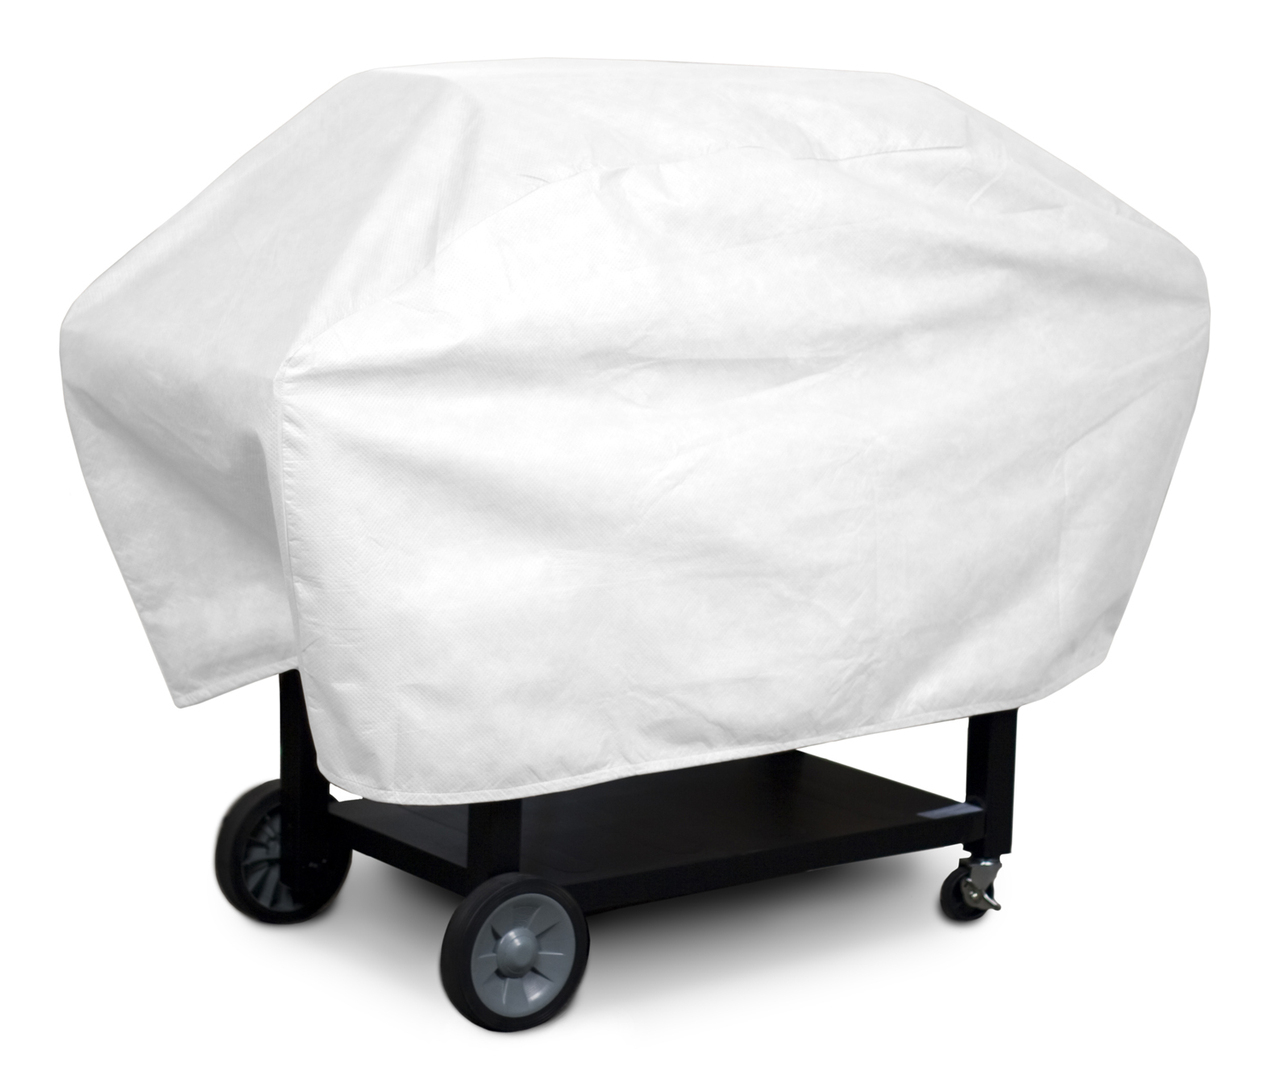 Grill Cover - 66W x 29D x 45H in.